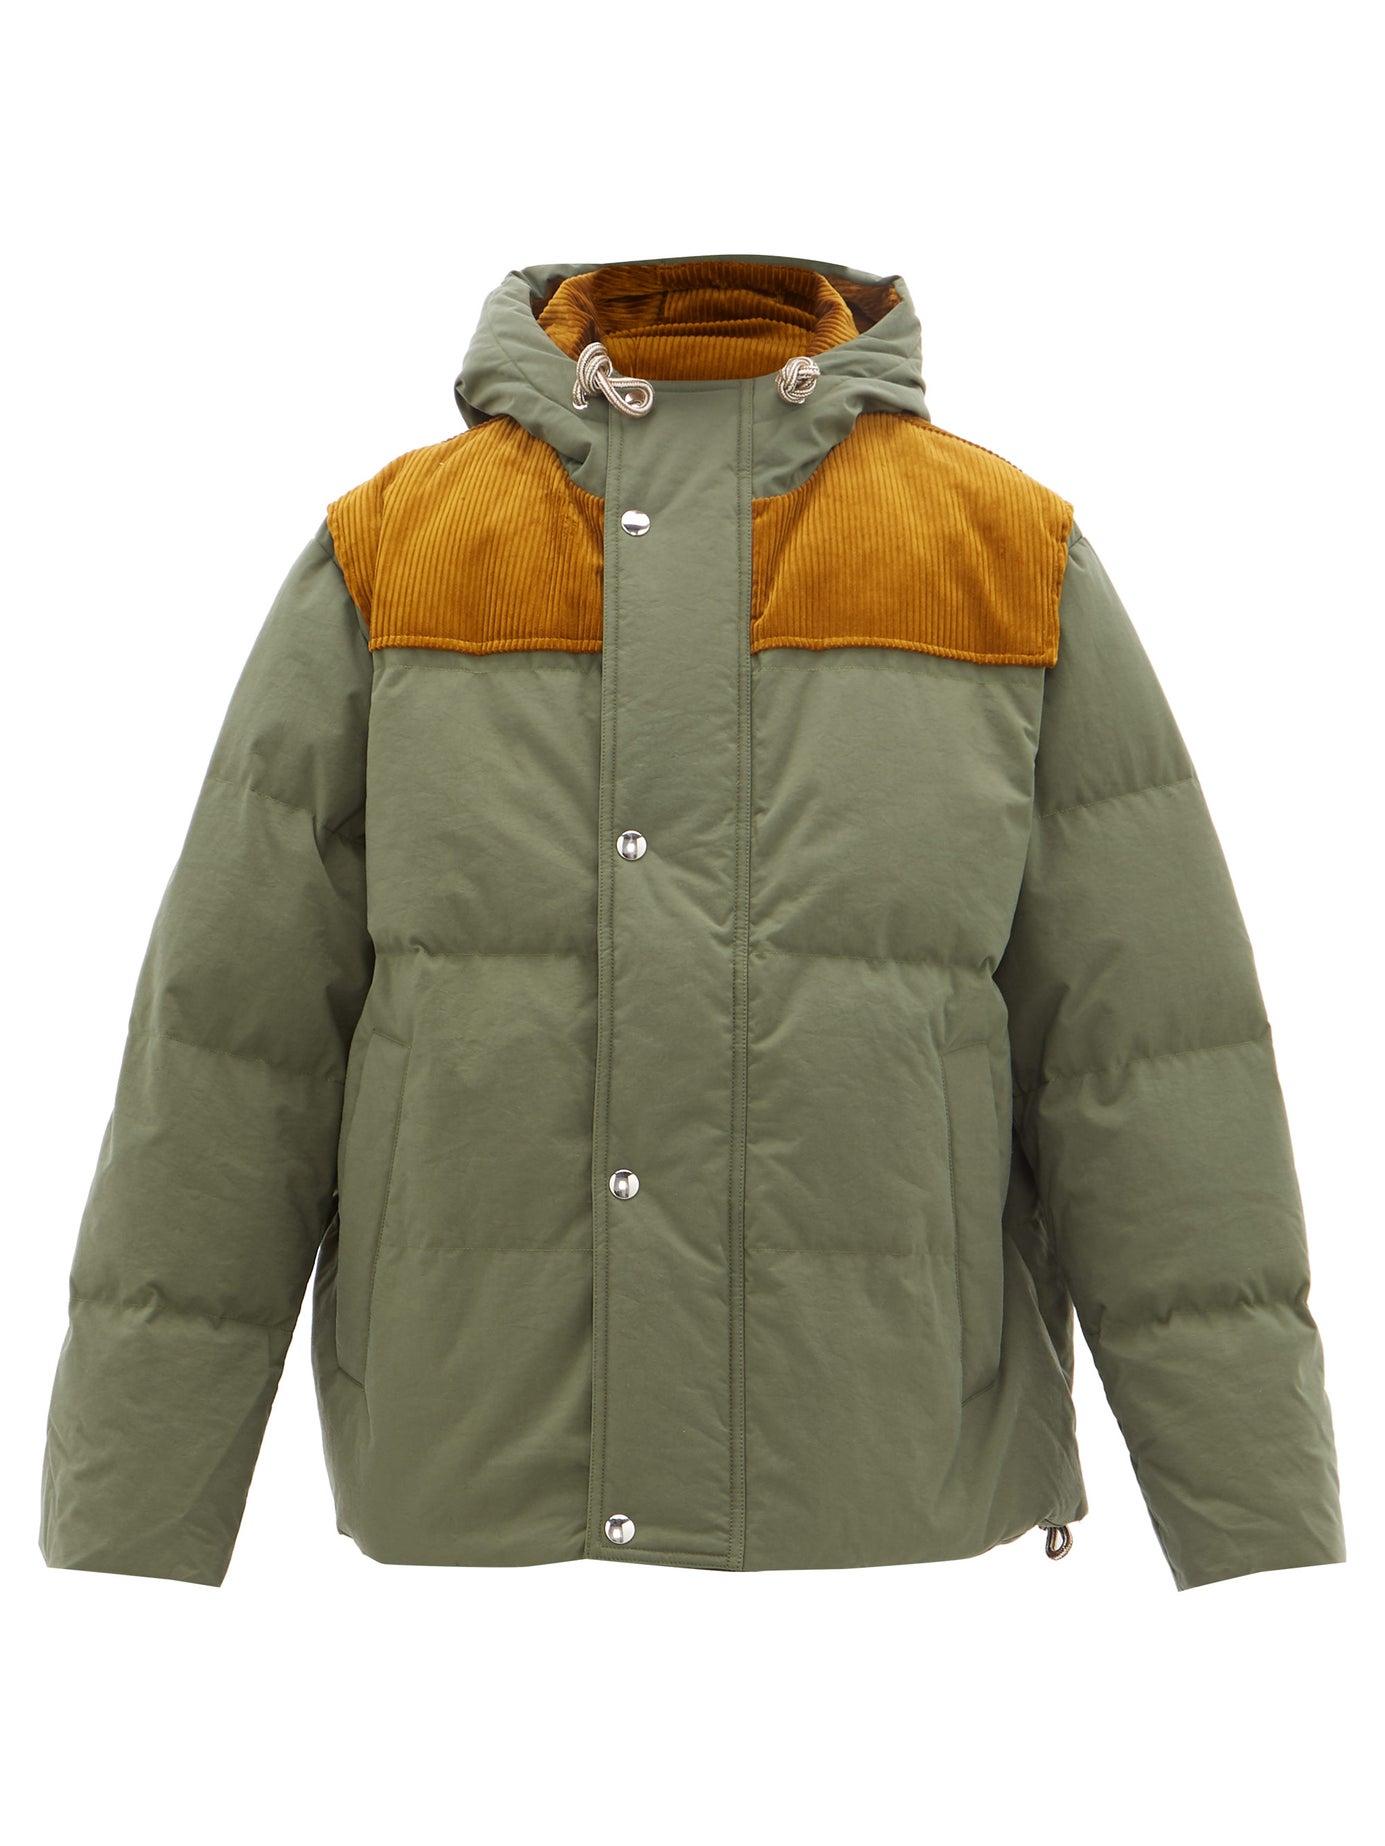 Acne Studios Orfeo Corduroy-panelled Down-filled Canvas Jacket in Khaki  (Green) for Men - Lyst